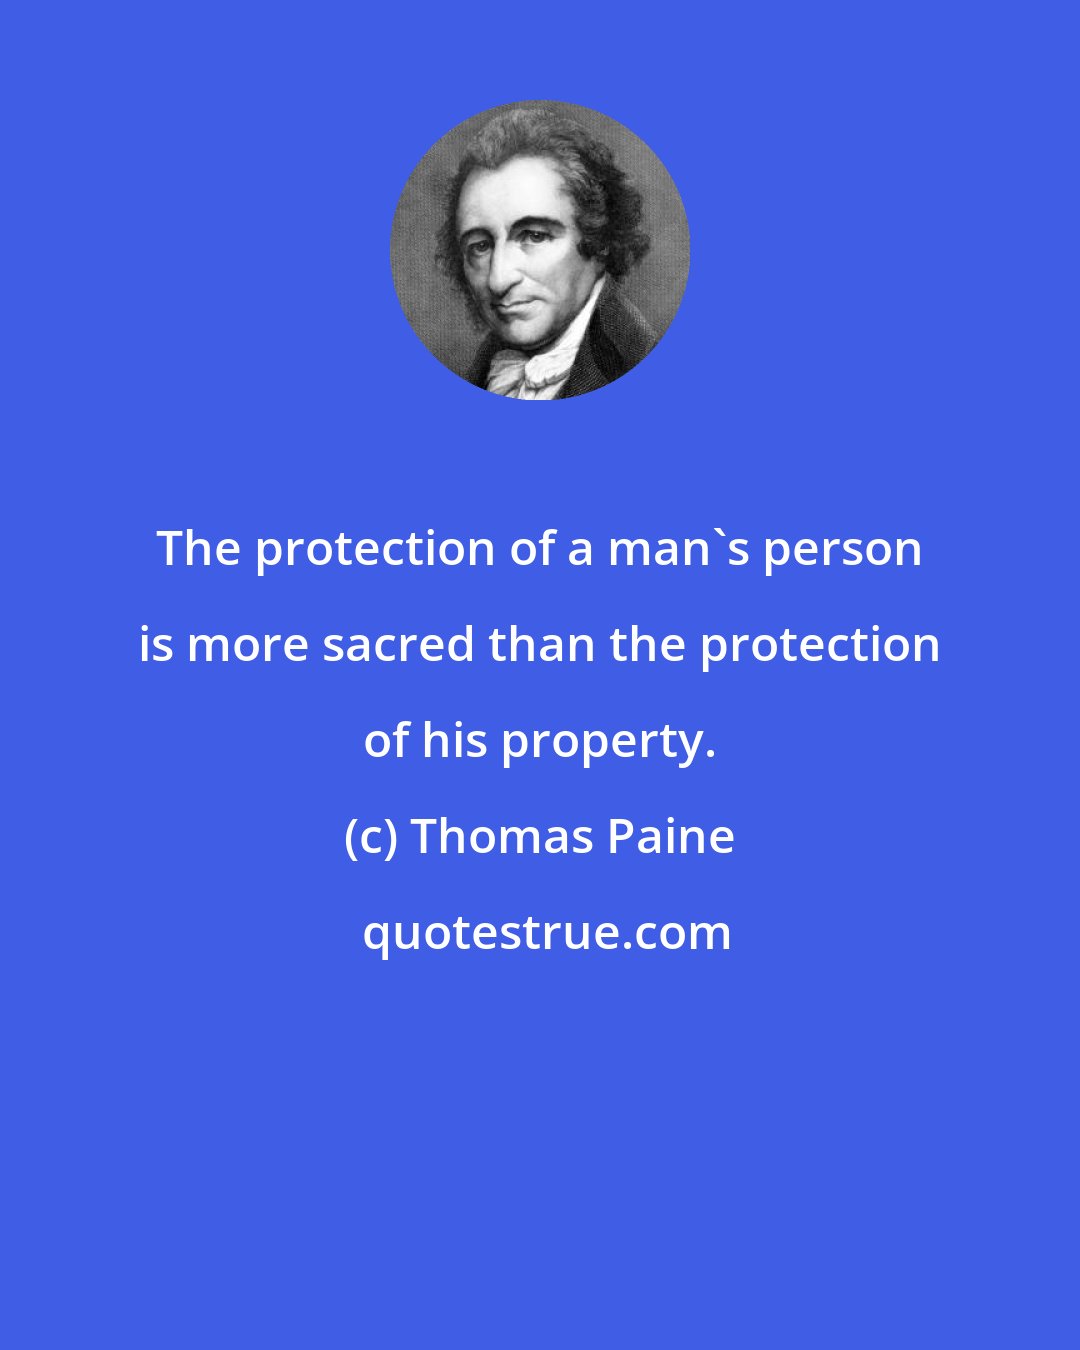 Thomas Paine: The protection of a man's person is more sacred than the protection of his property.